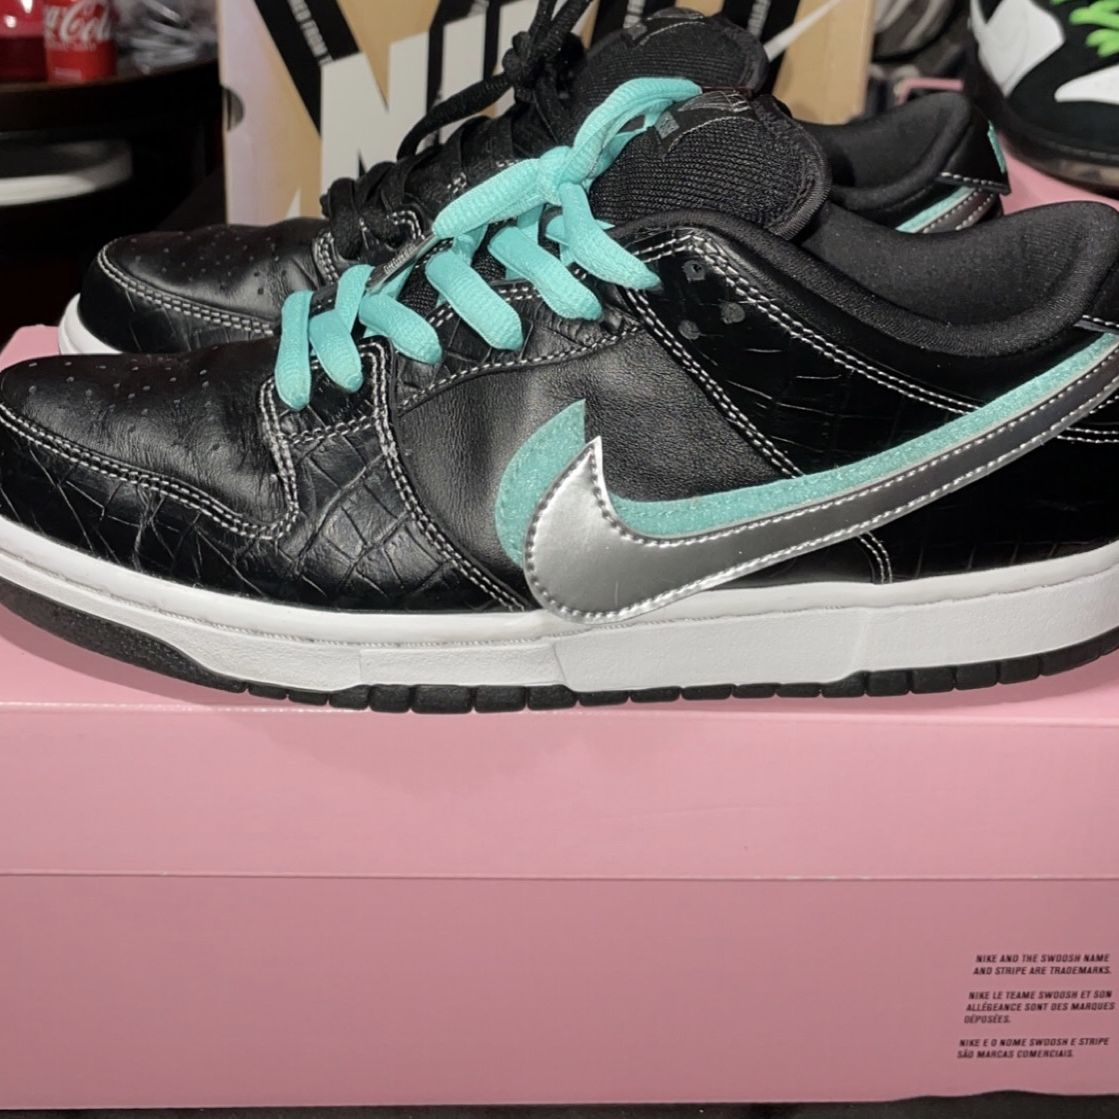 Supply Co. x Nike Dunk Low Pro SB Diamond' for Sale in Stickney, - OfferUp